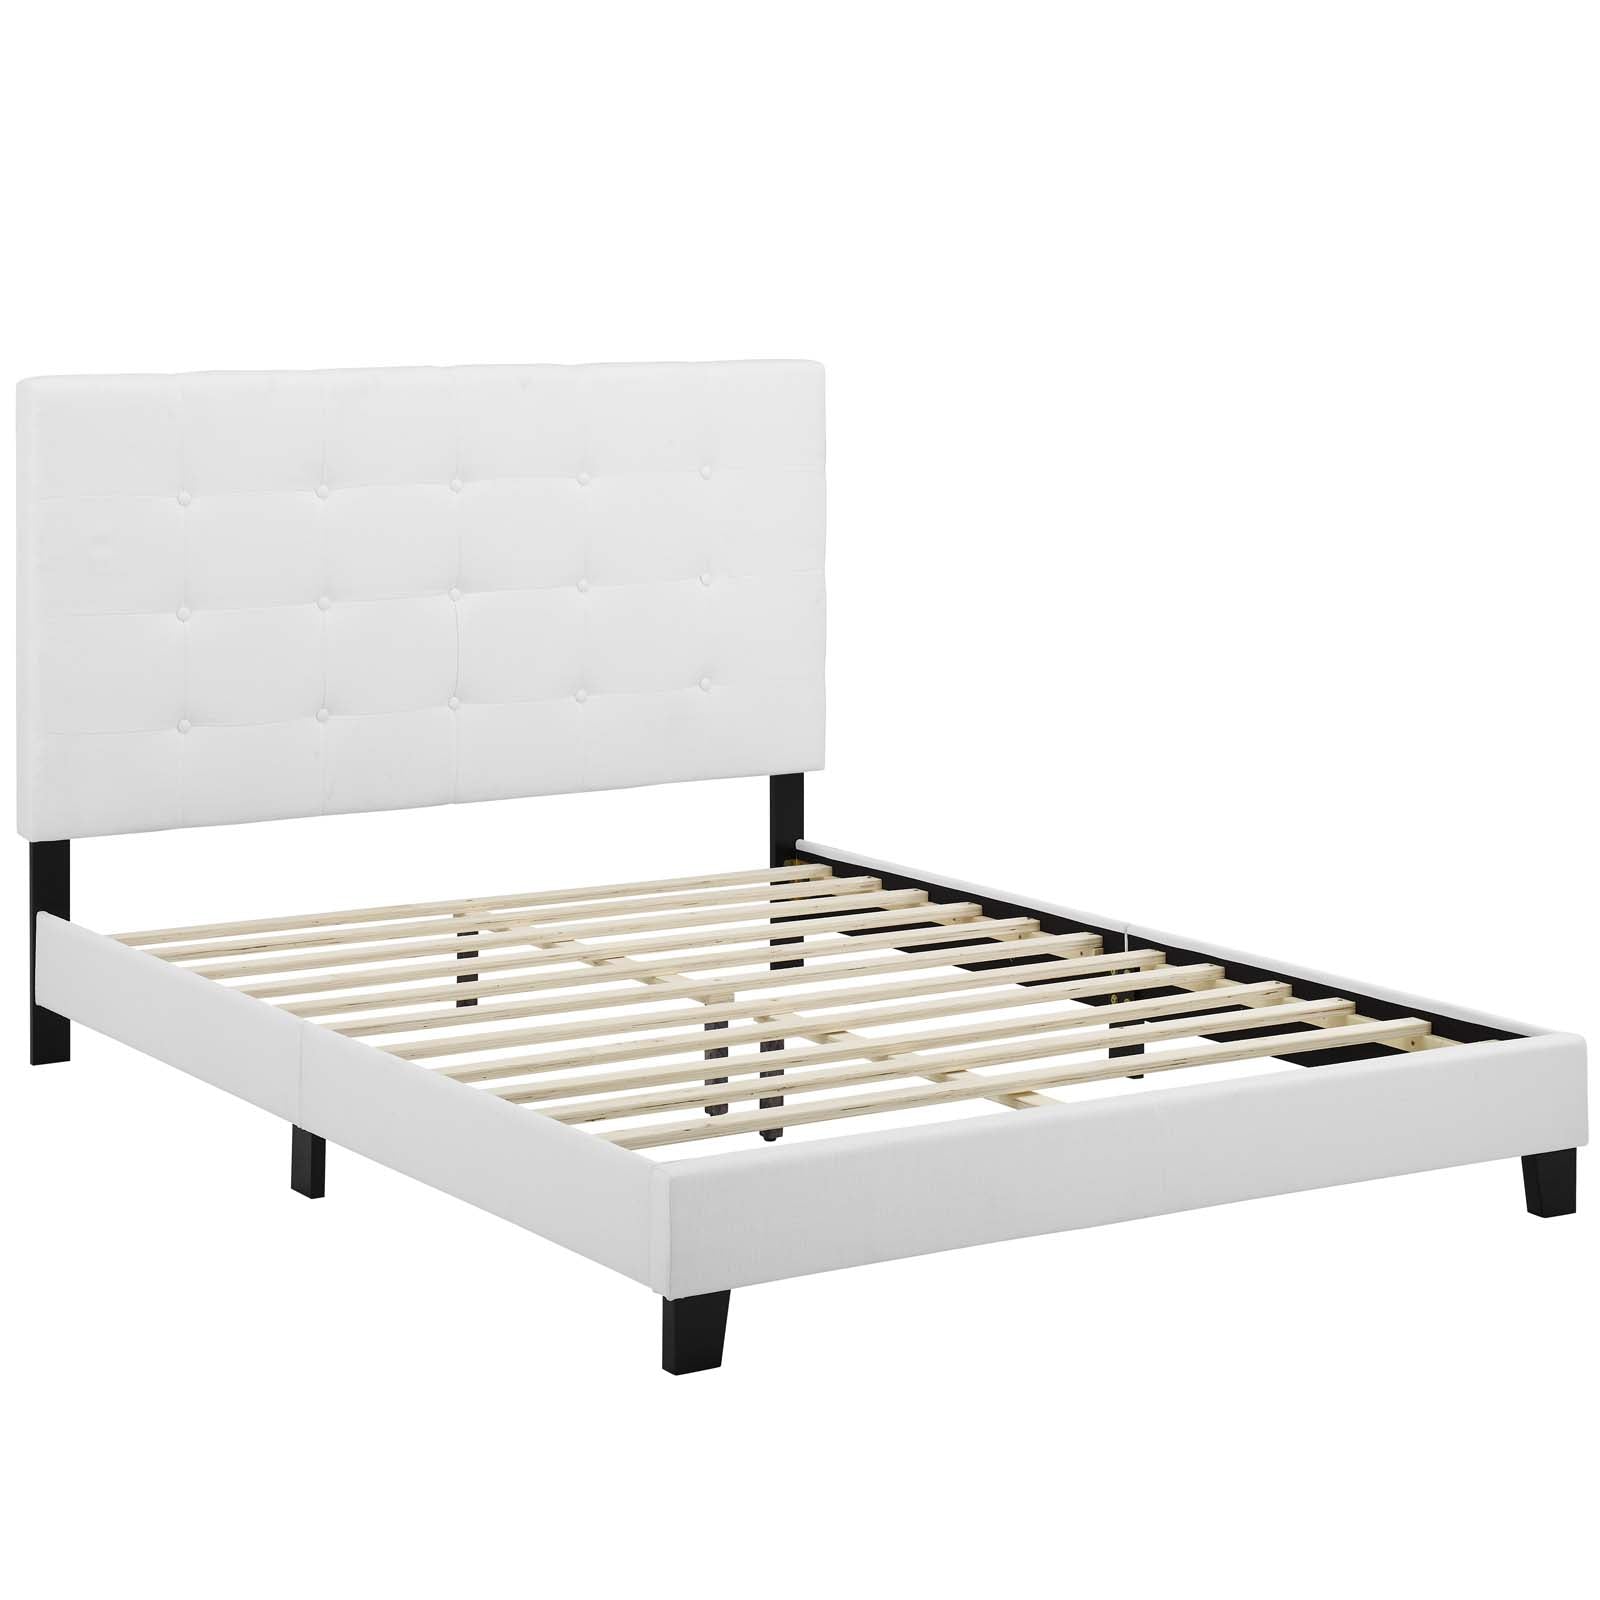 Modway Beds - Melanie Full Tufted Button Upholstered Fabric Platform Bed White